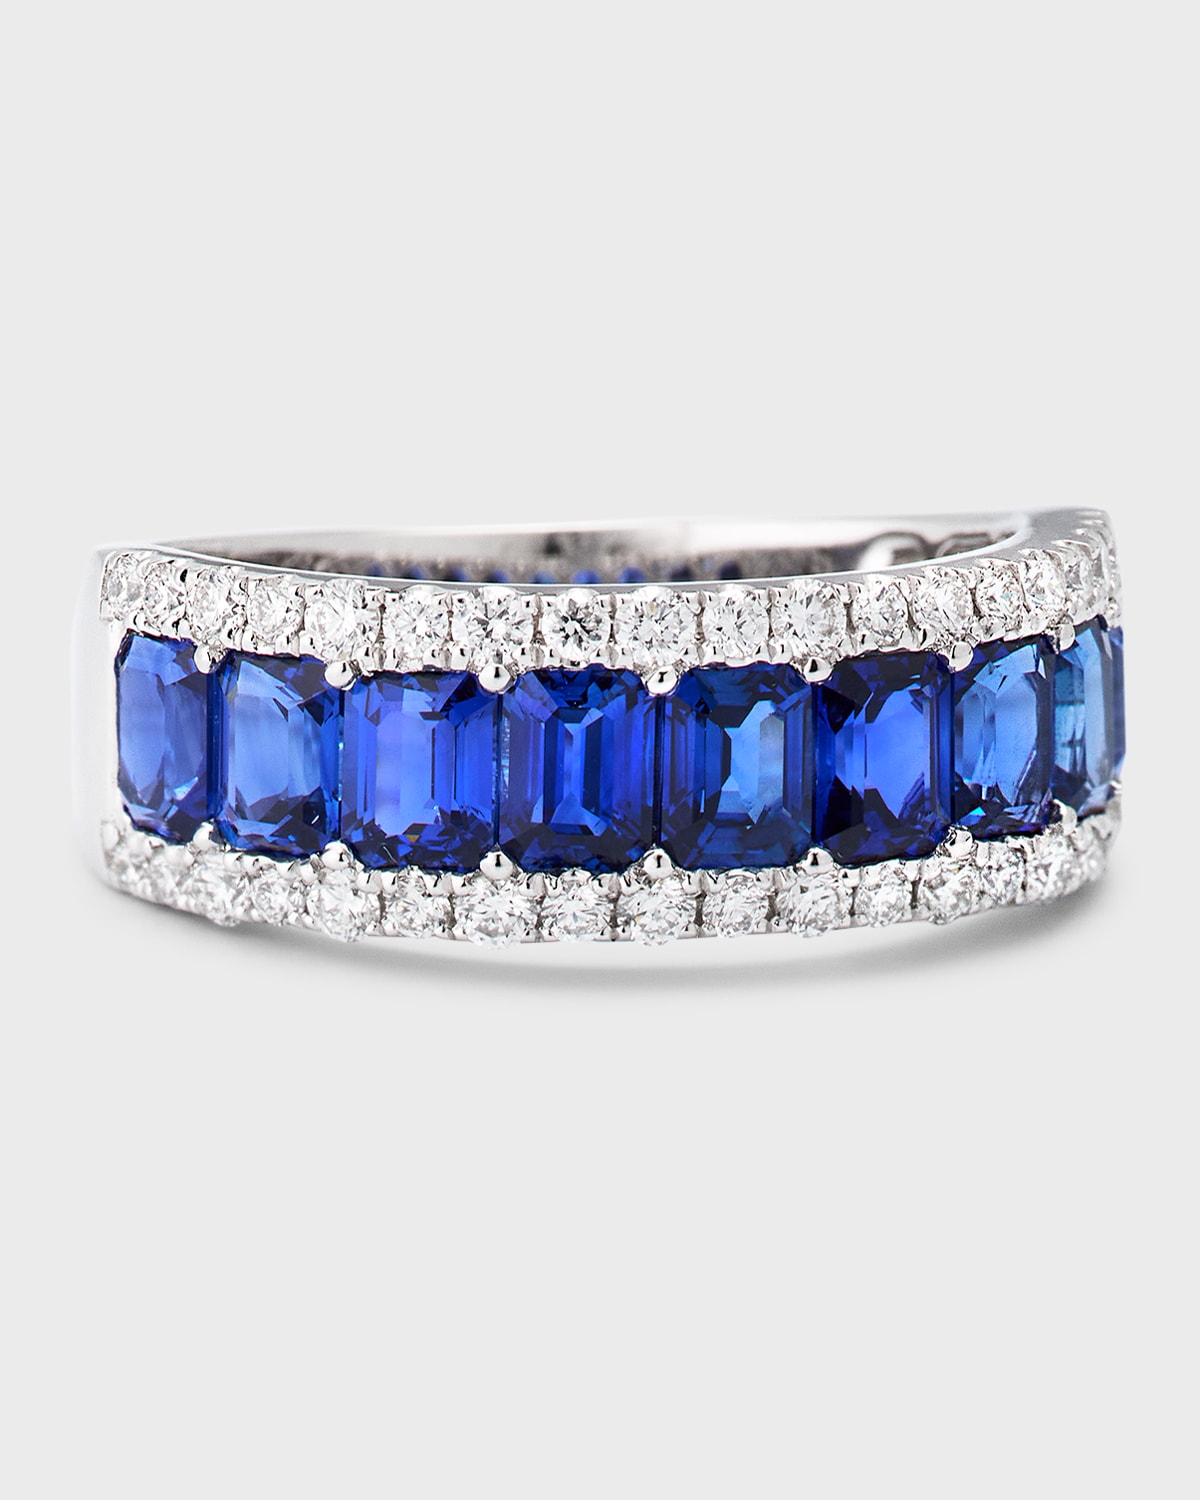 18K White Gold Ring with Blue Sapphires and Diamonds, Size 6.5